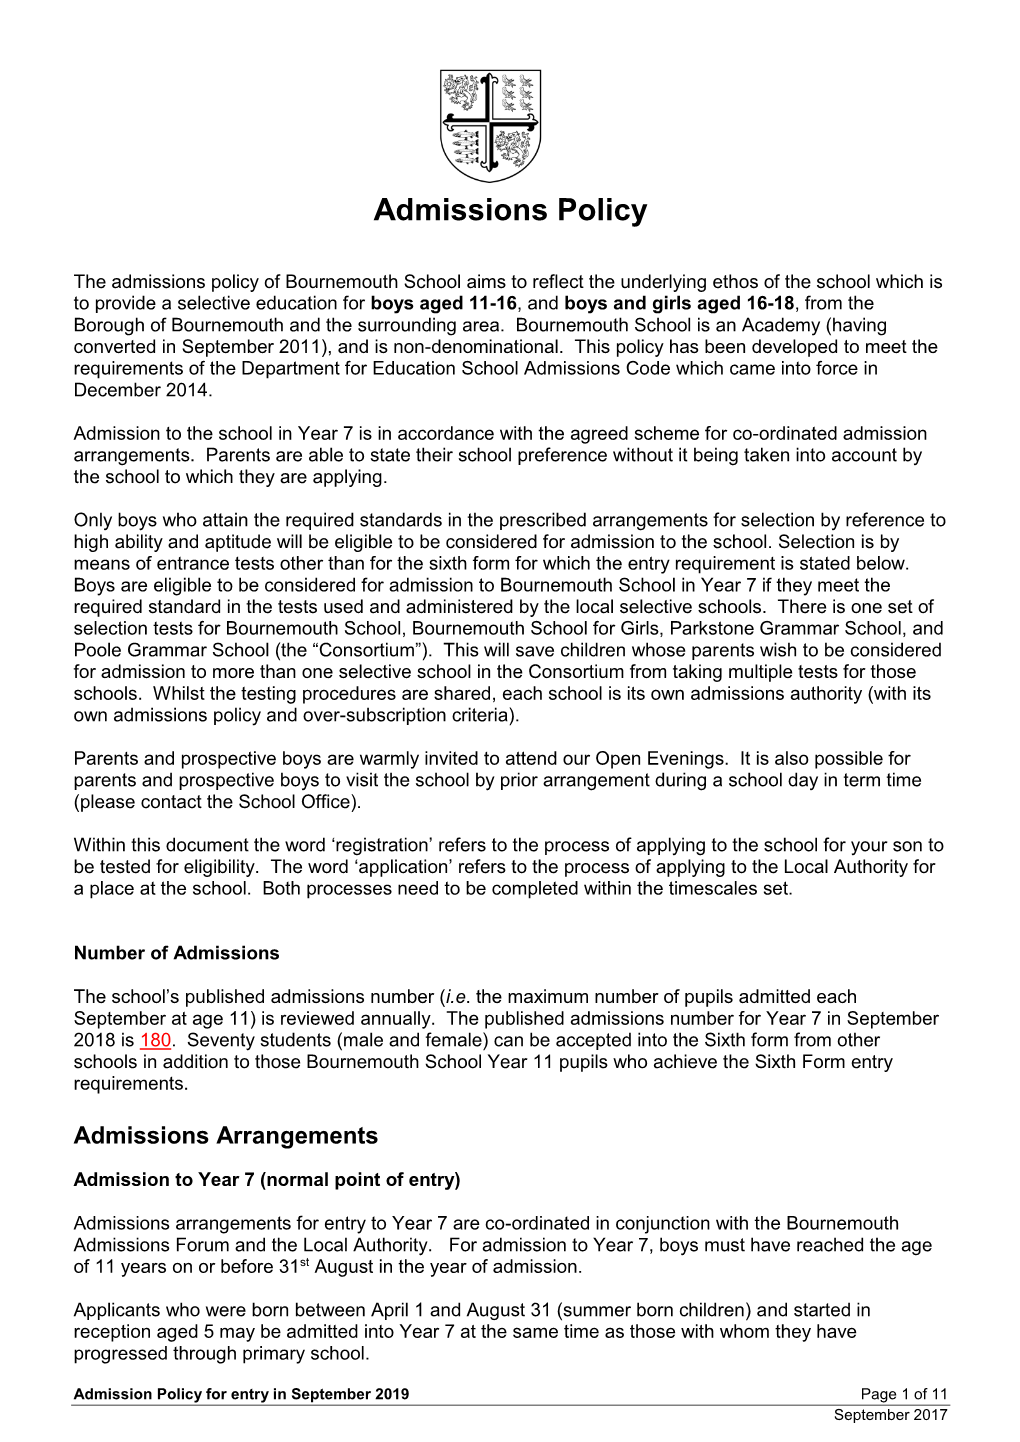 Bournemouth School Proposed Admissions Policy 2019-20